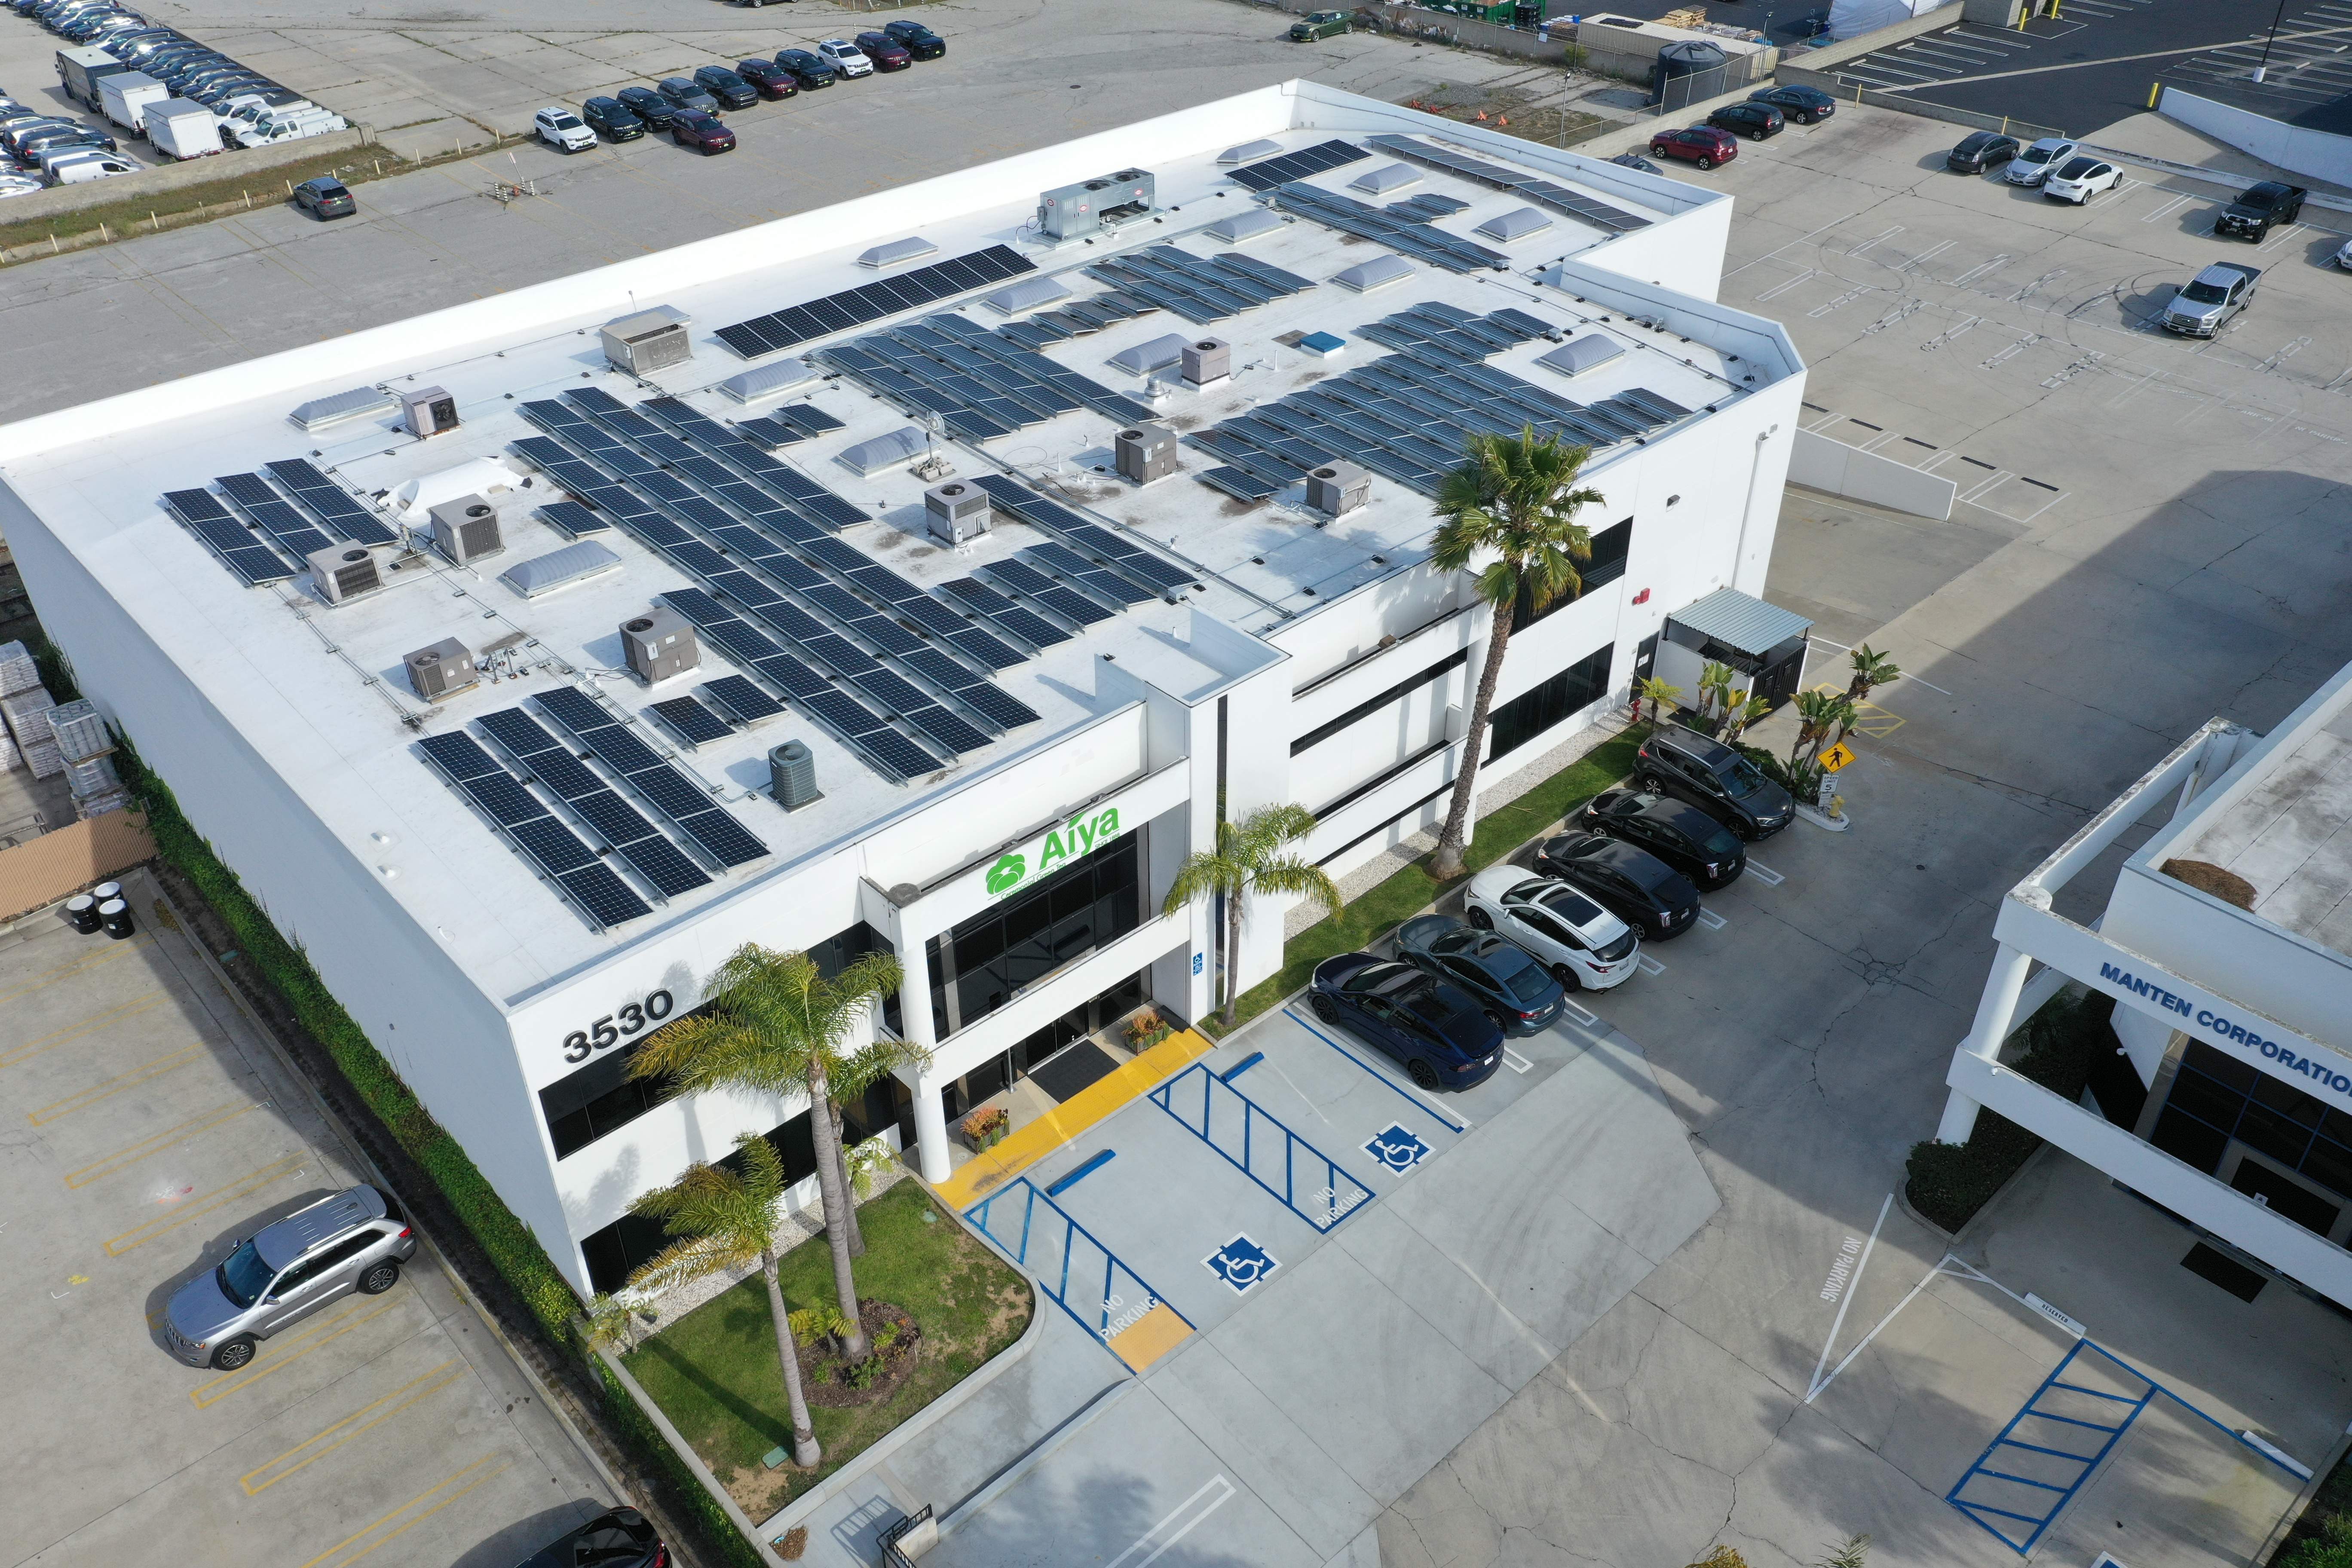 Aerial view of solar panels on a building.